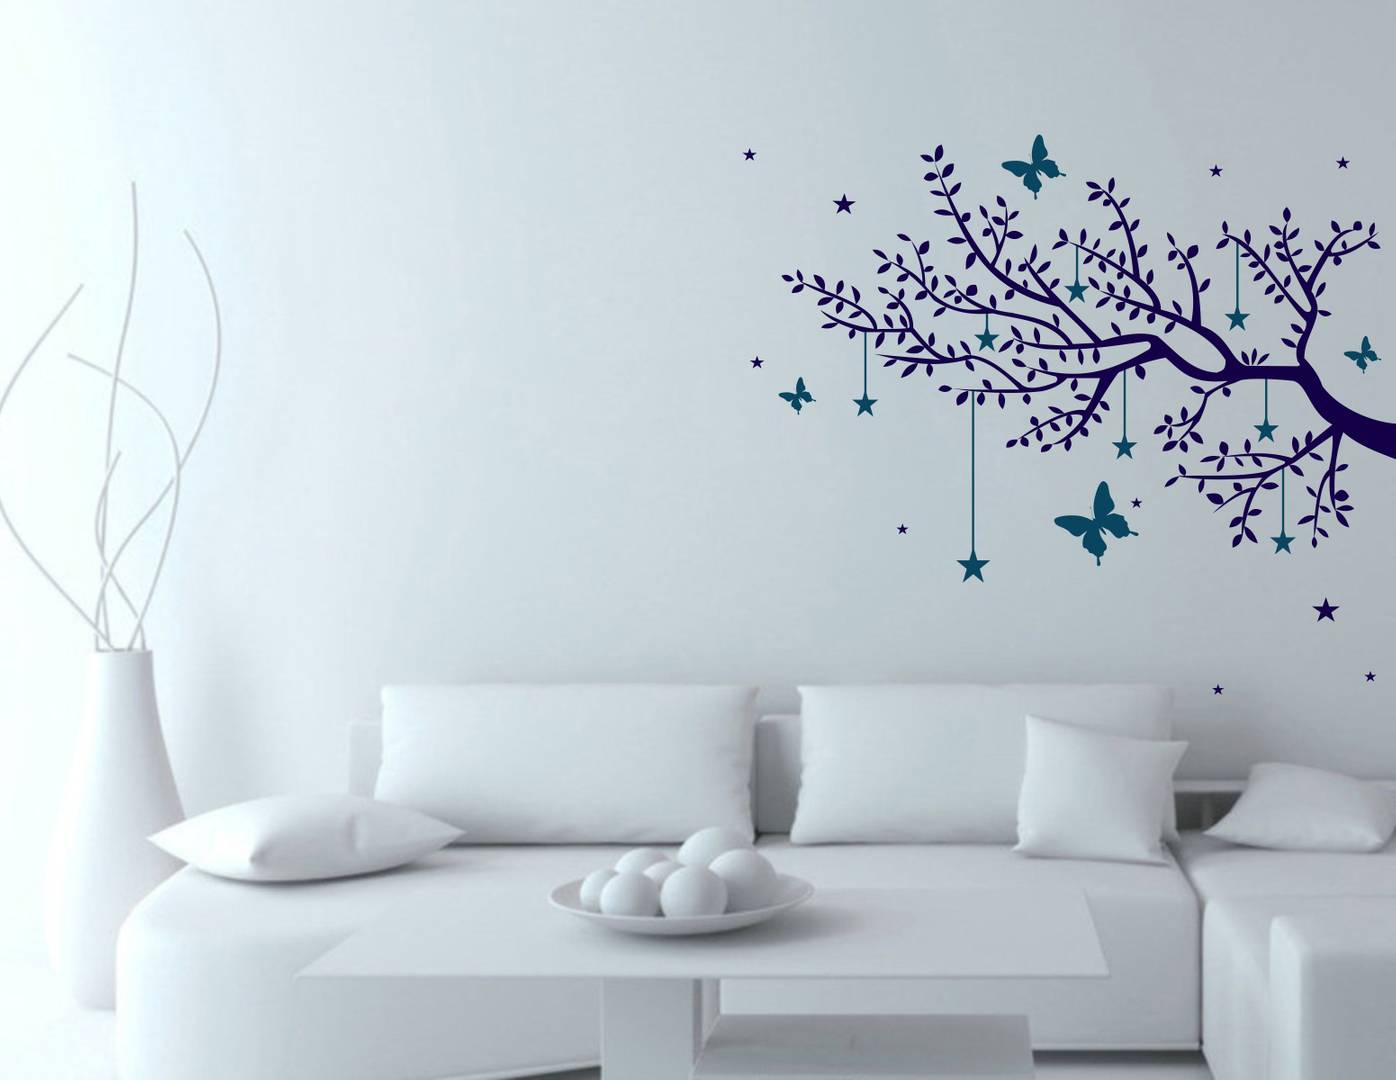 Wall Stickers | Wall Sticker For Living Room -Bedroom - Office ...